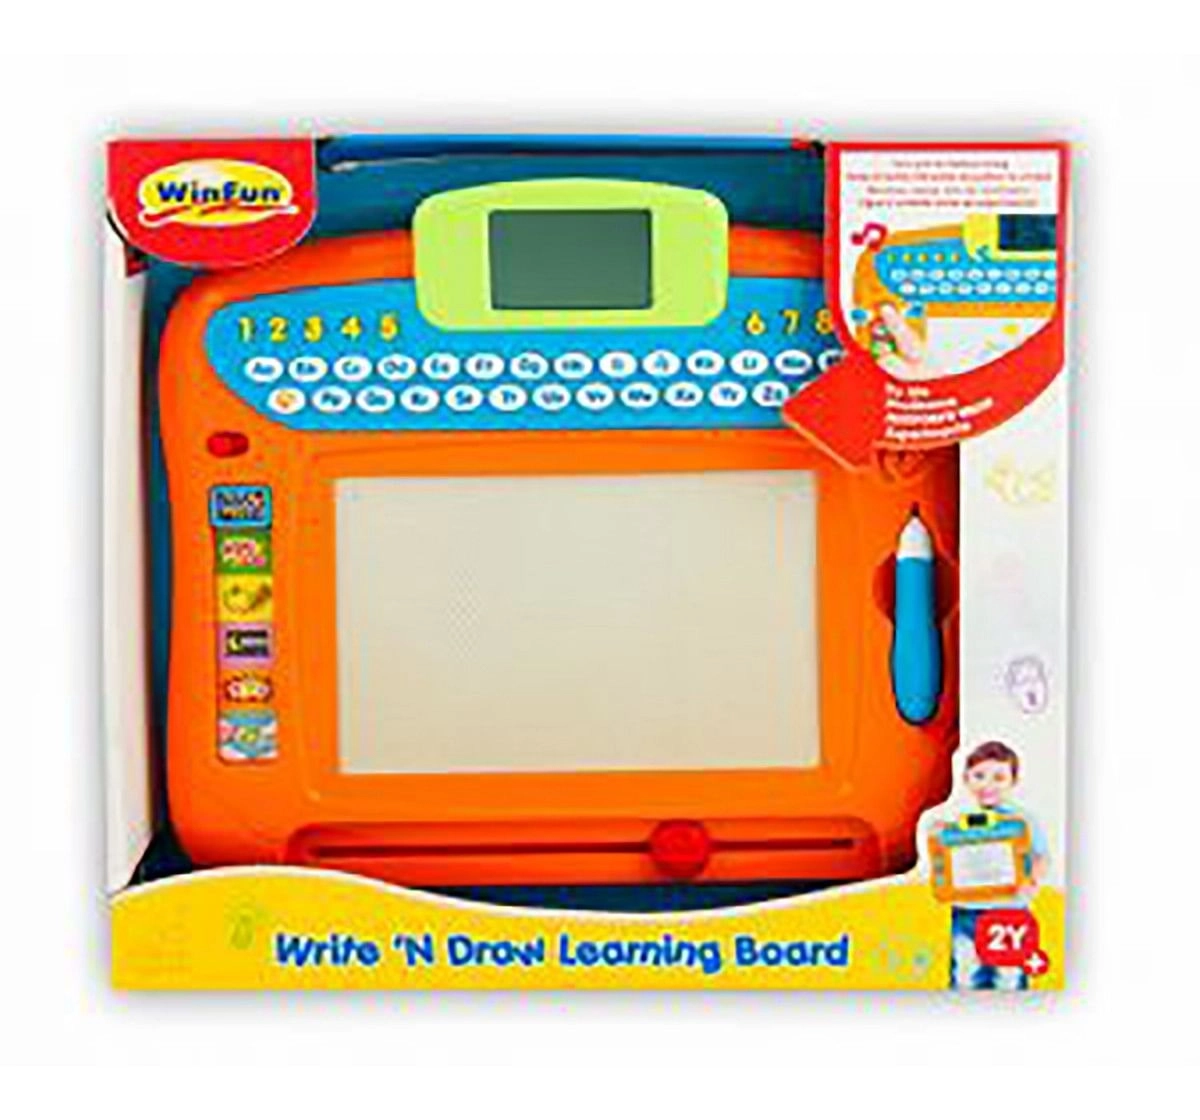 Winfun - Write Draw Learning Board Toys for Kids age 2Y+ 